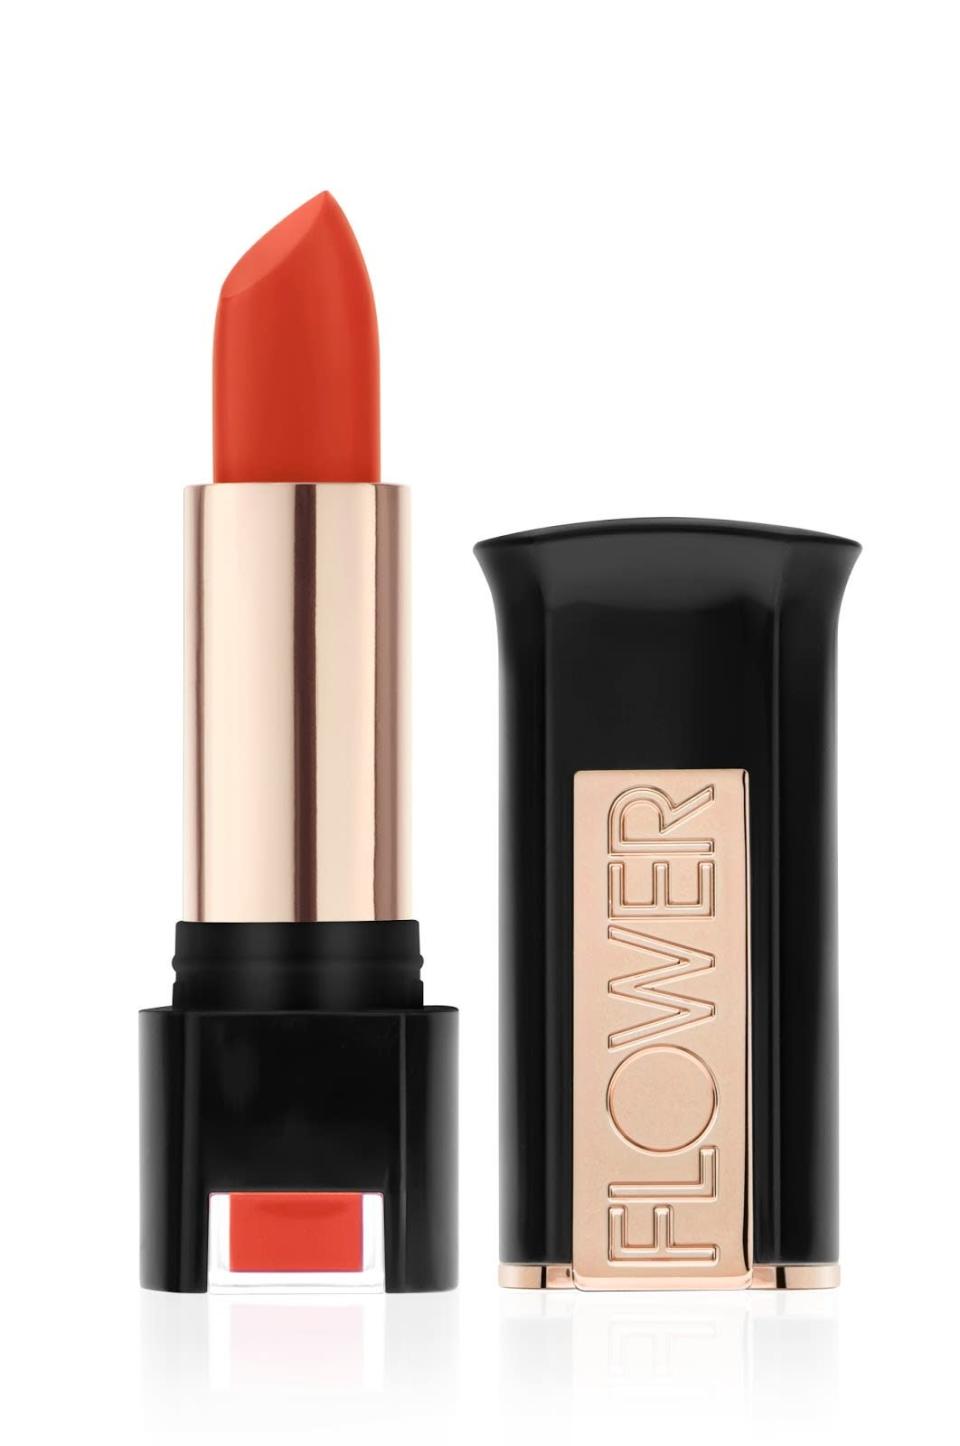 FLOWER Kiss Stick High Shine Lip Color in Cactus Flower 